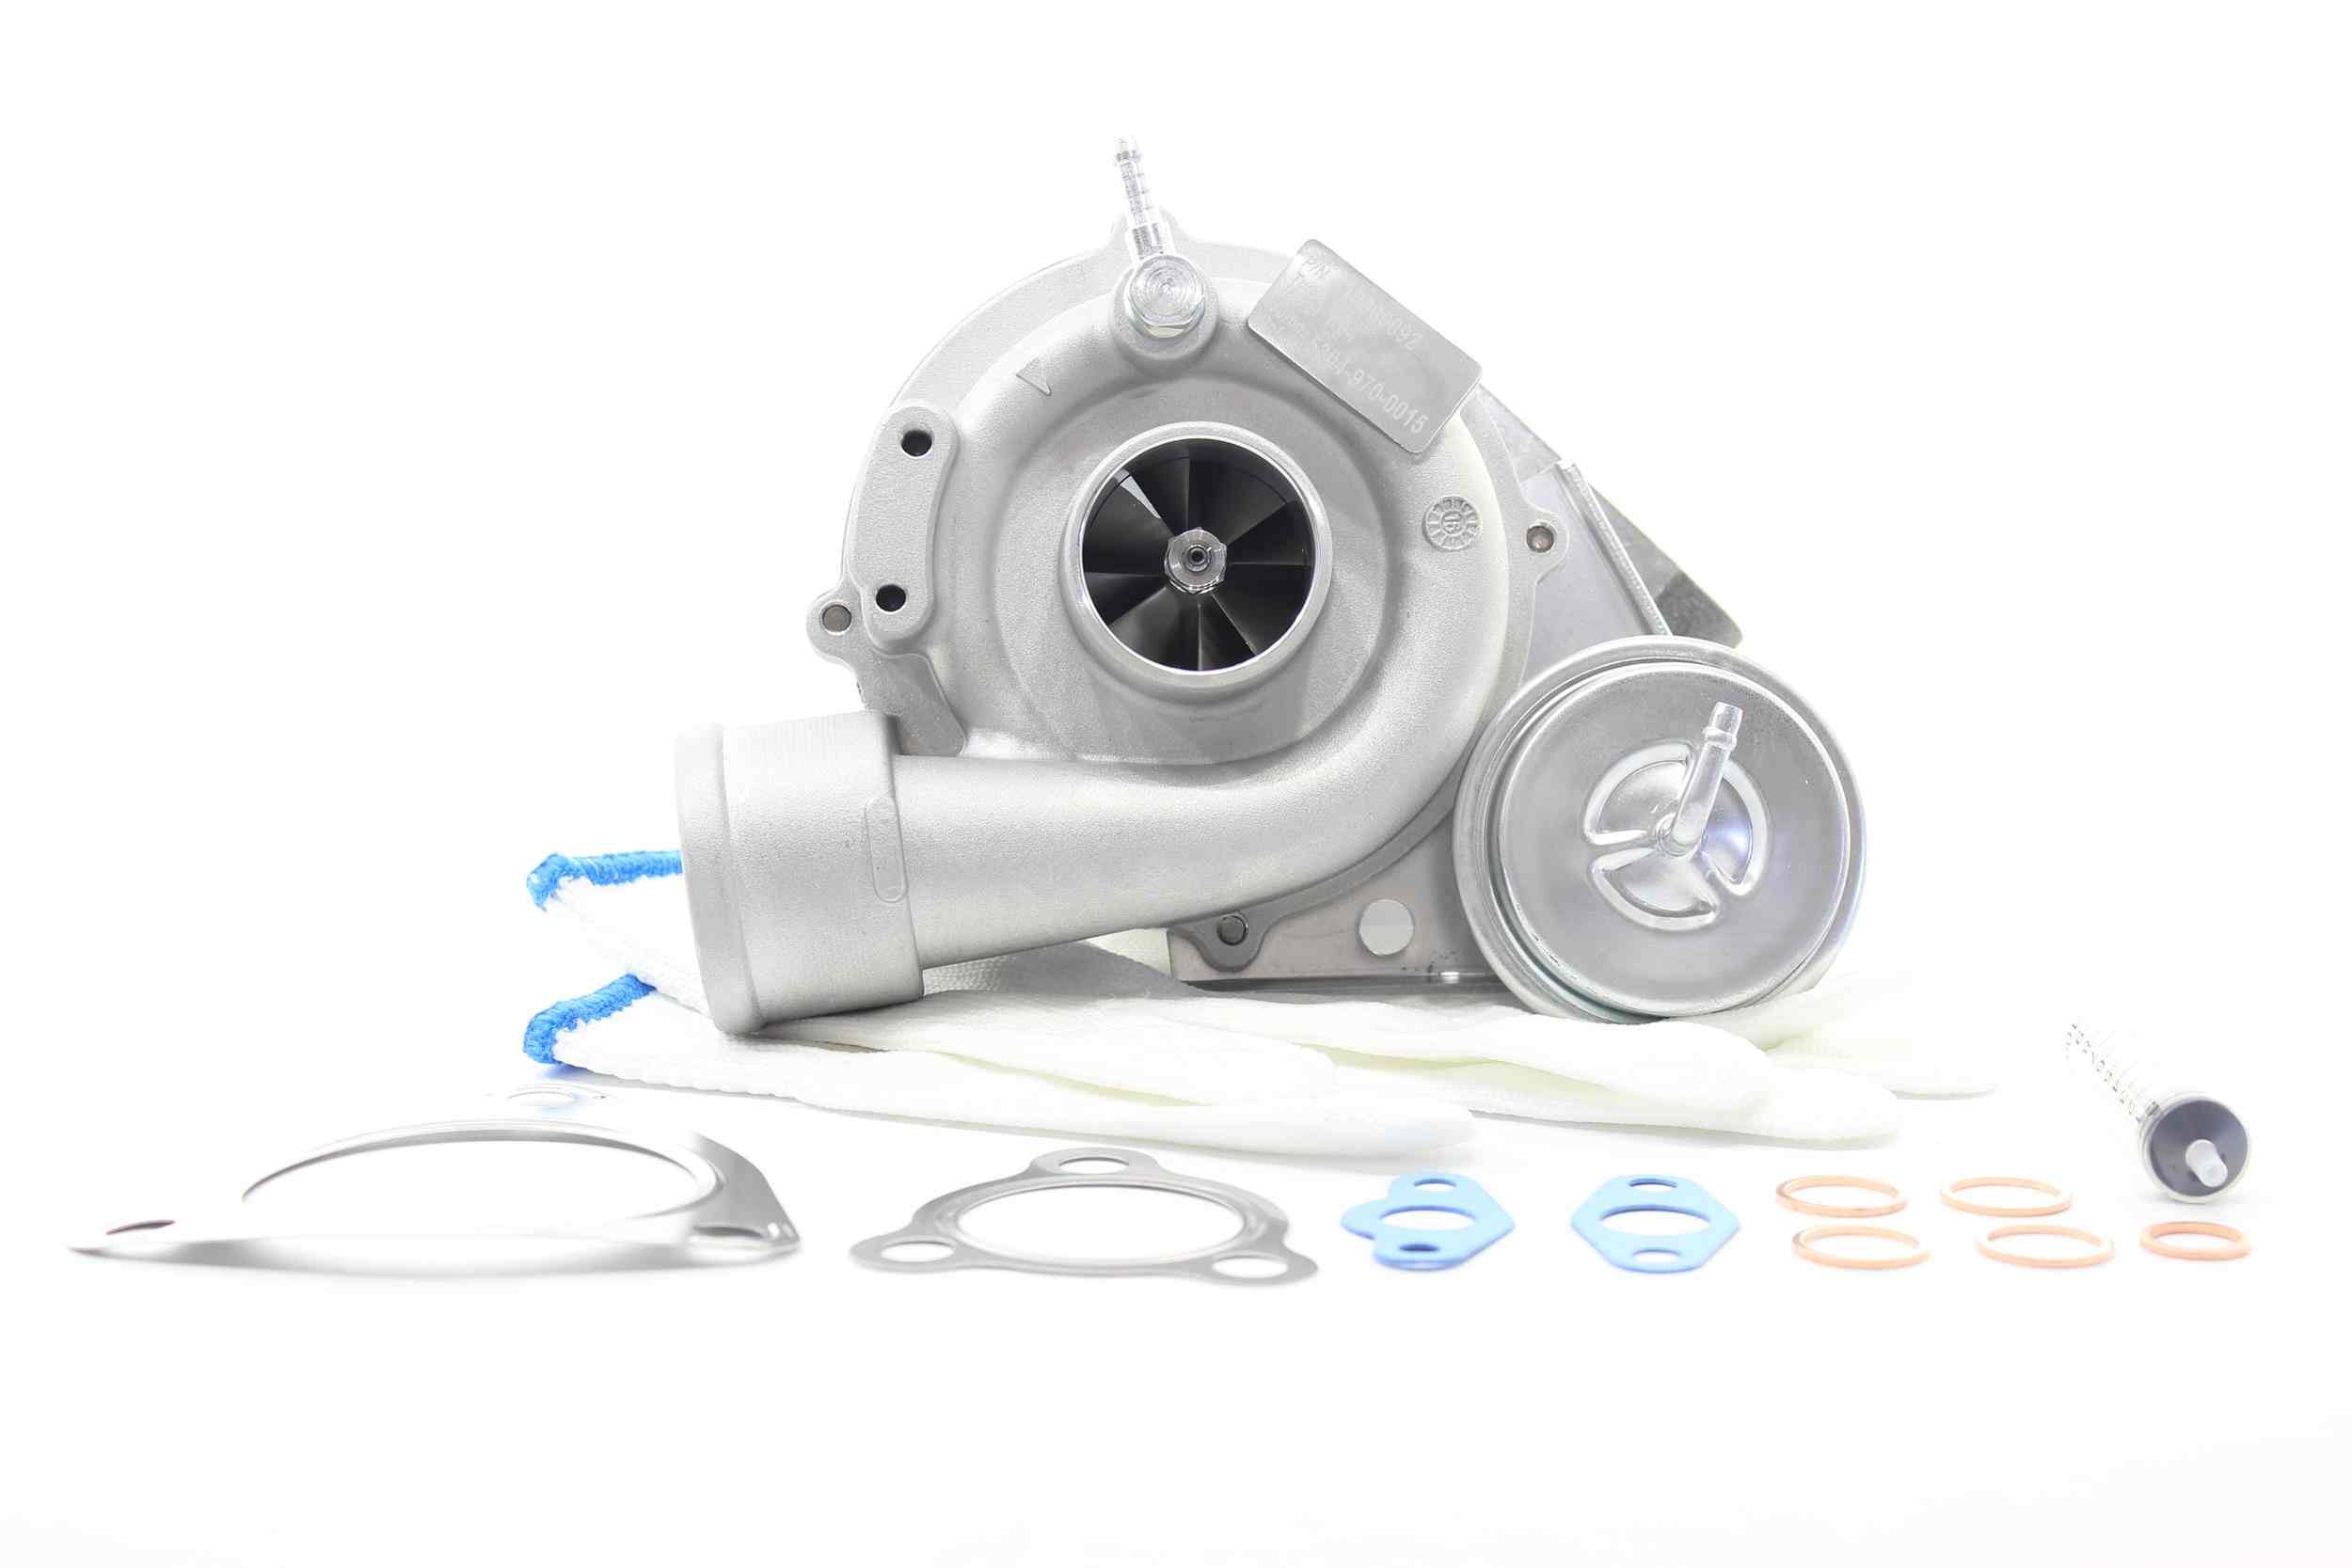 ALANKO 10900092 Turbocharger Exhaust Turbocharger, Incl. Gasket Set, with attachment material